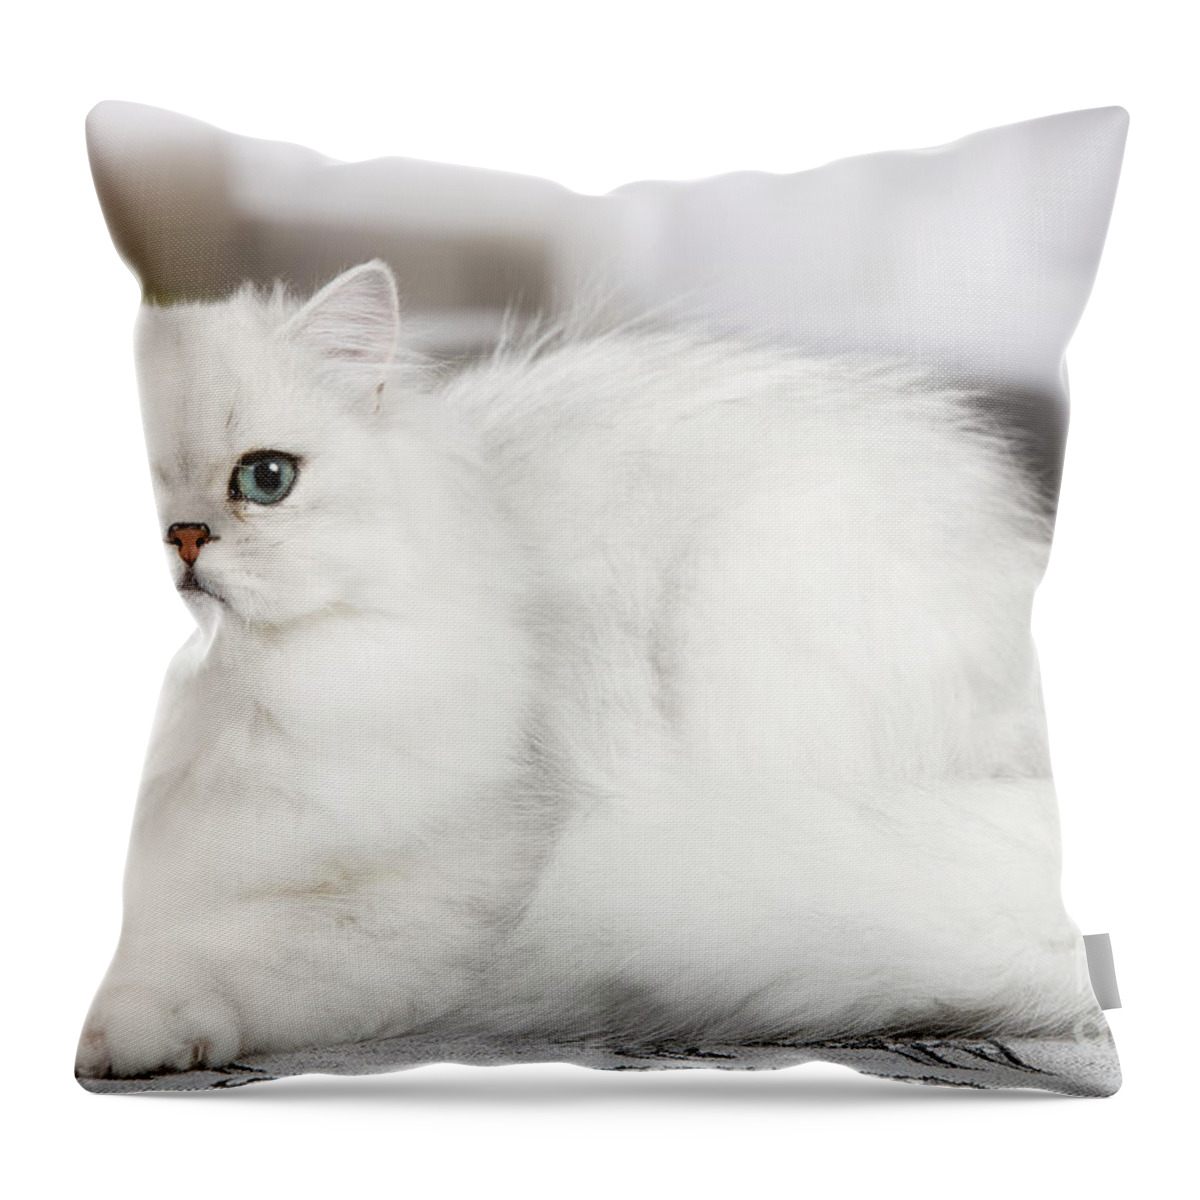 Cat Throw Pillow featuring the photograph Chinchilla Persian Cat #2 by Jean-Michel Labat